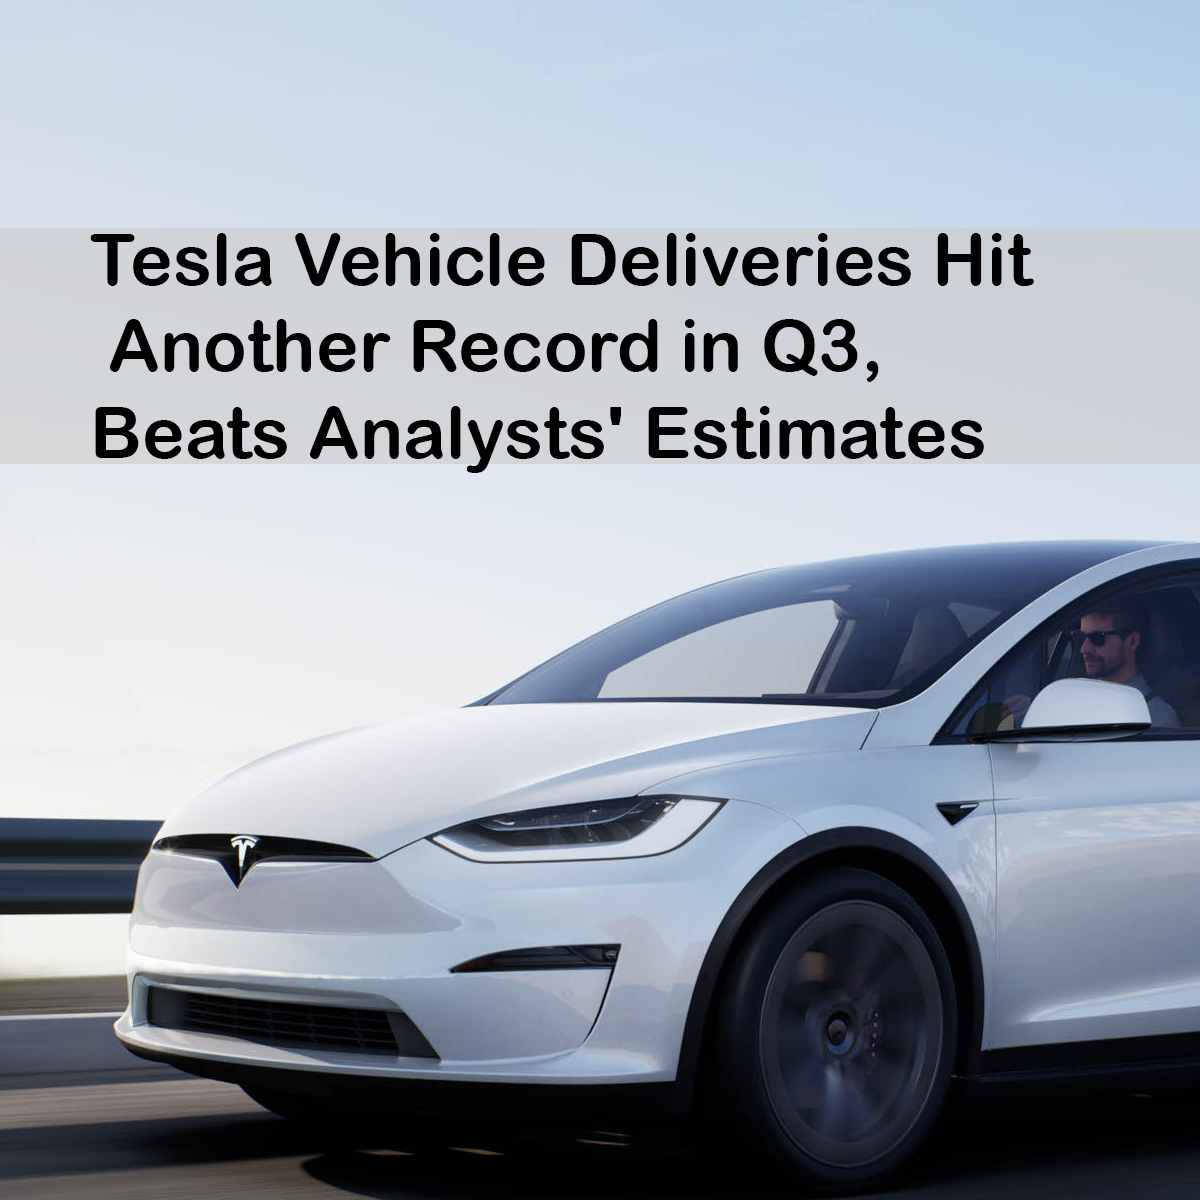 Tesla Vehicle Deliveries Hit Another Record in Q3, Beats Analysts' Estimates